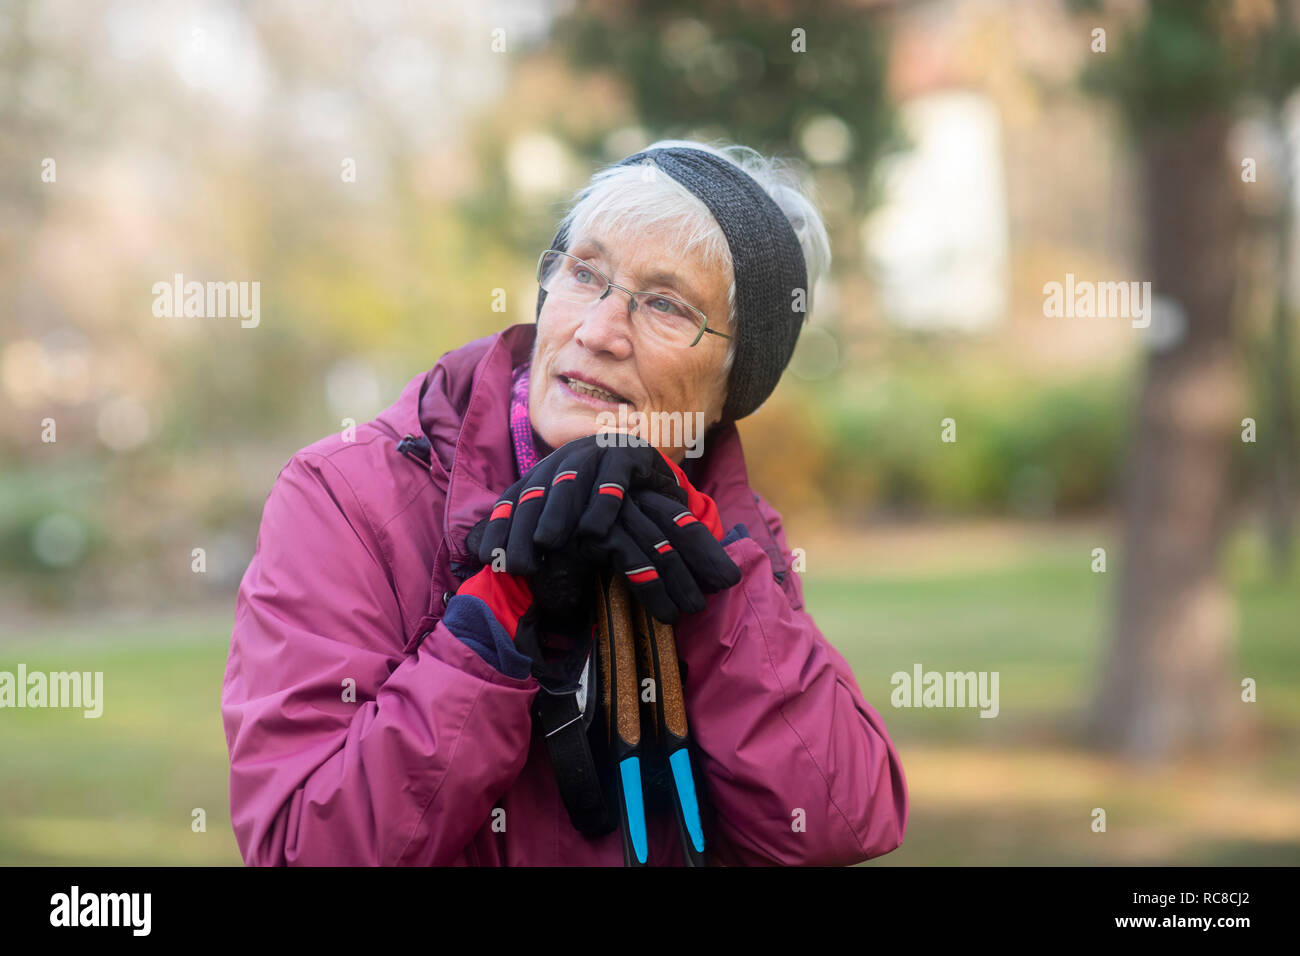 Senior woman resting from walk in park Stock Photo